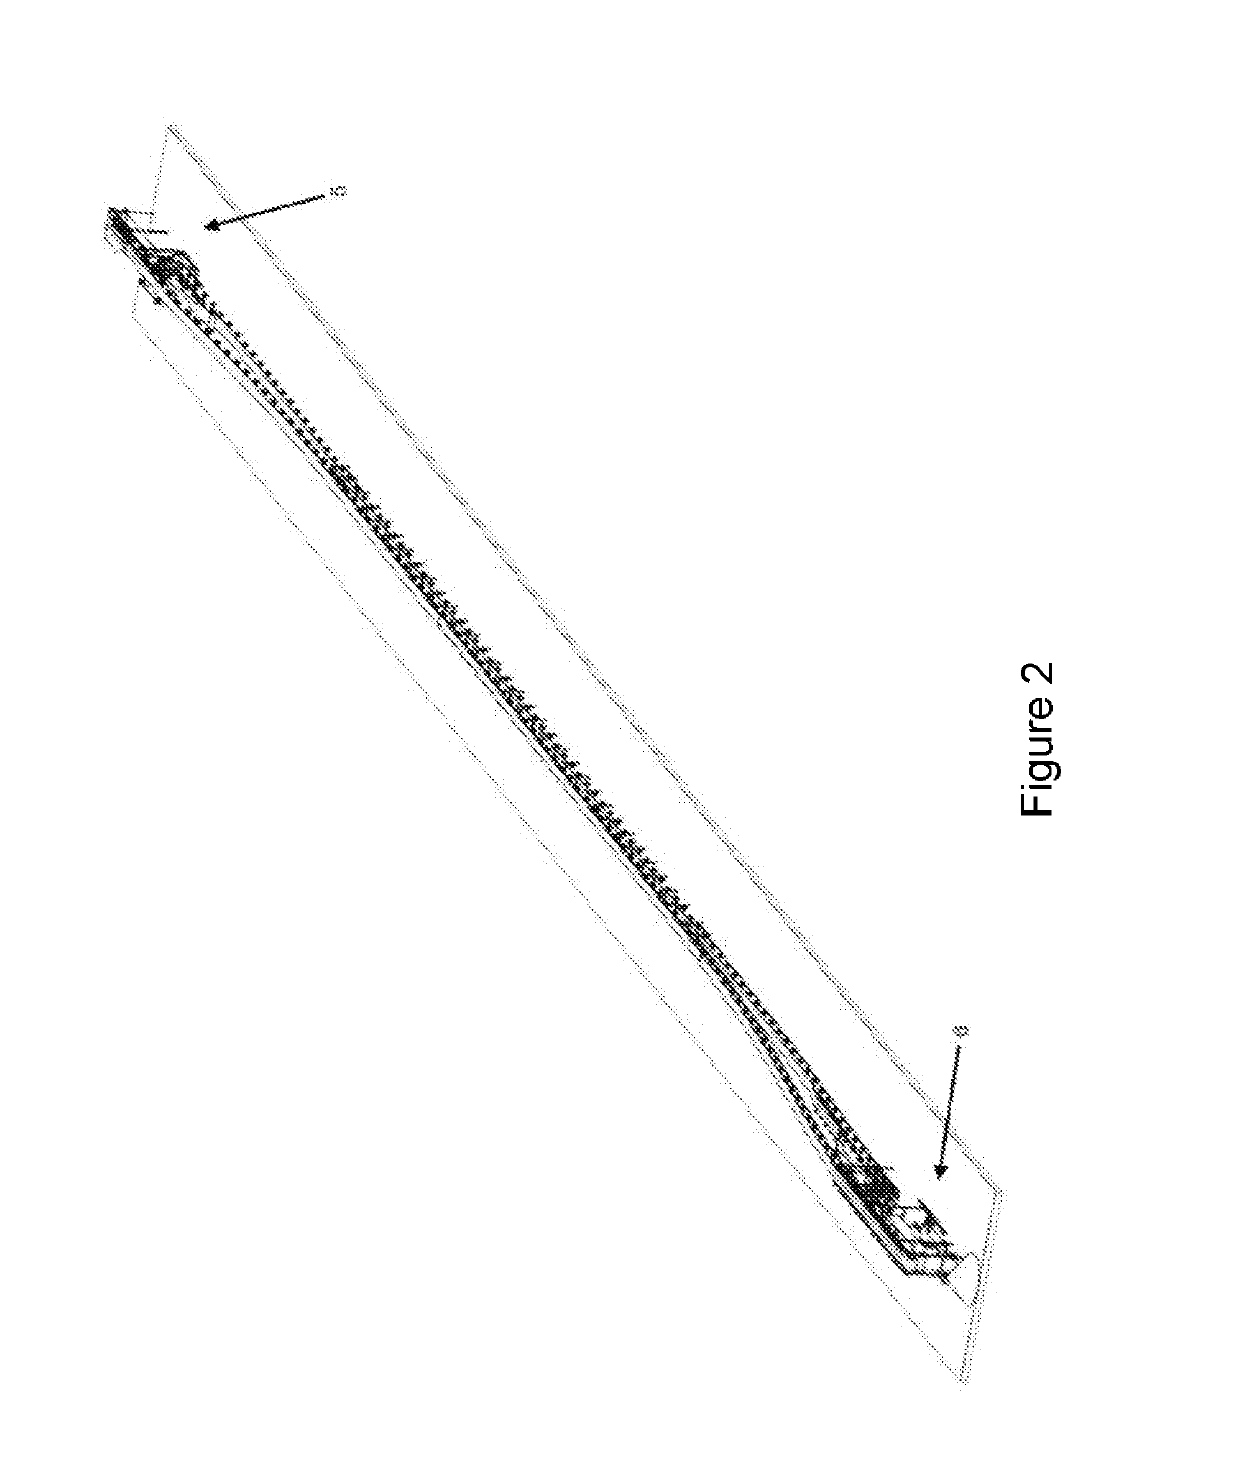 Rail conveyor system with vertical carriage return